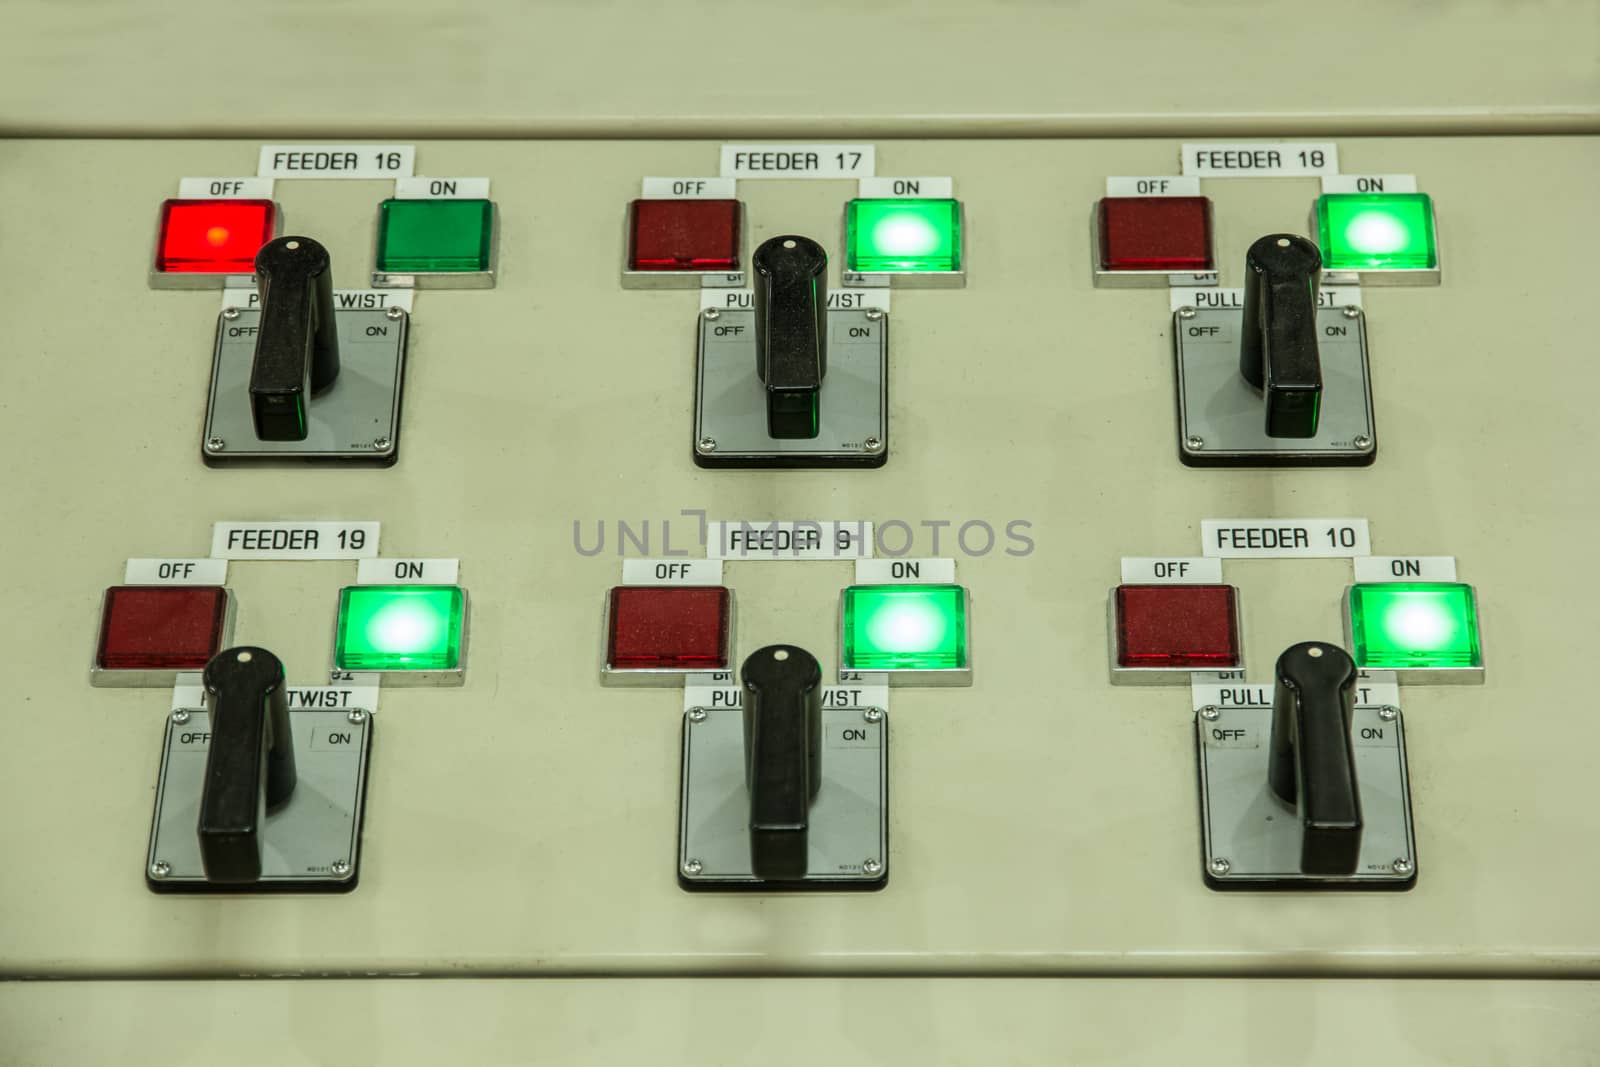 An image of an control switching panel